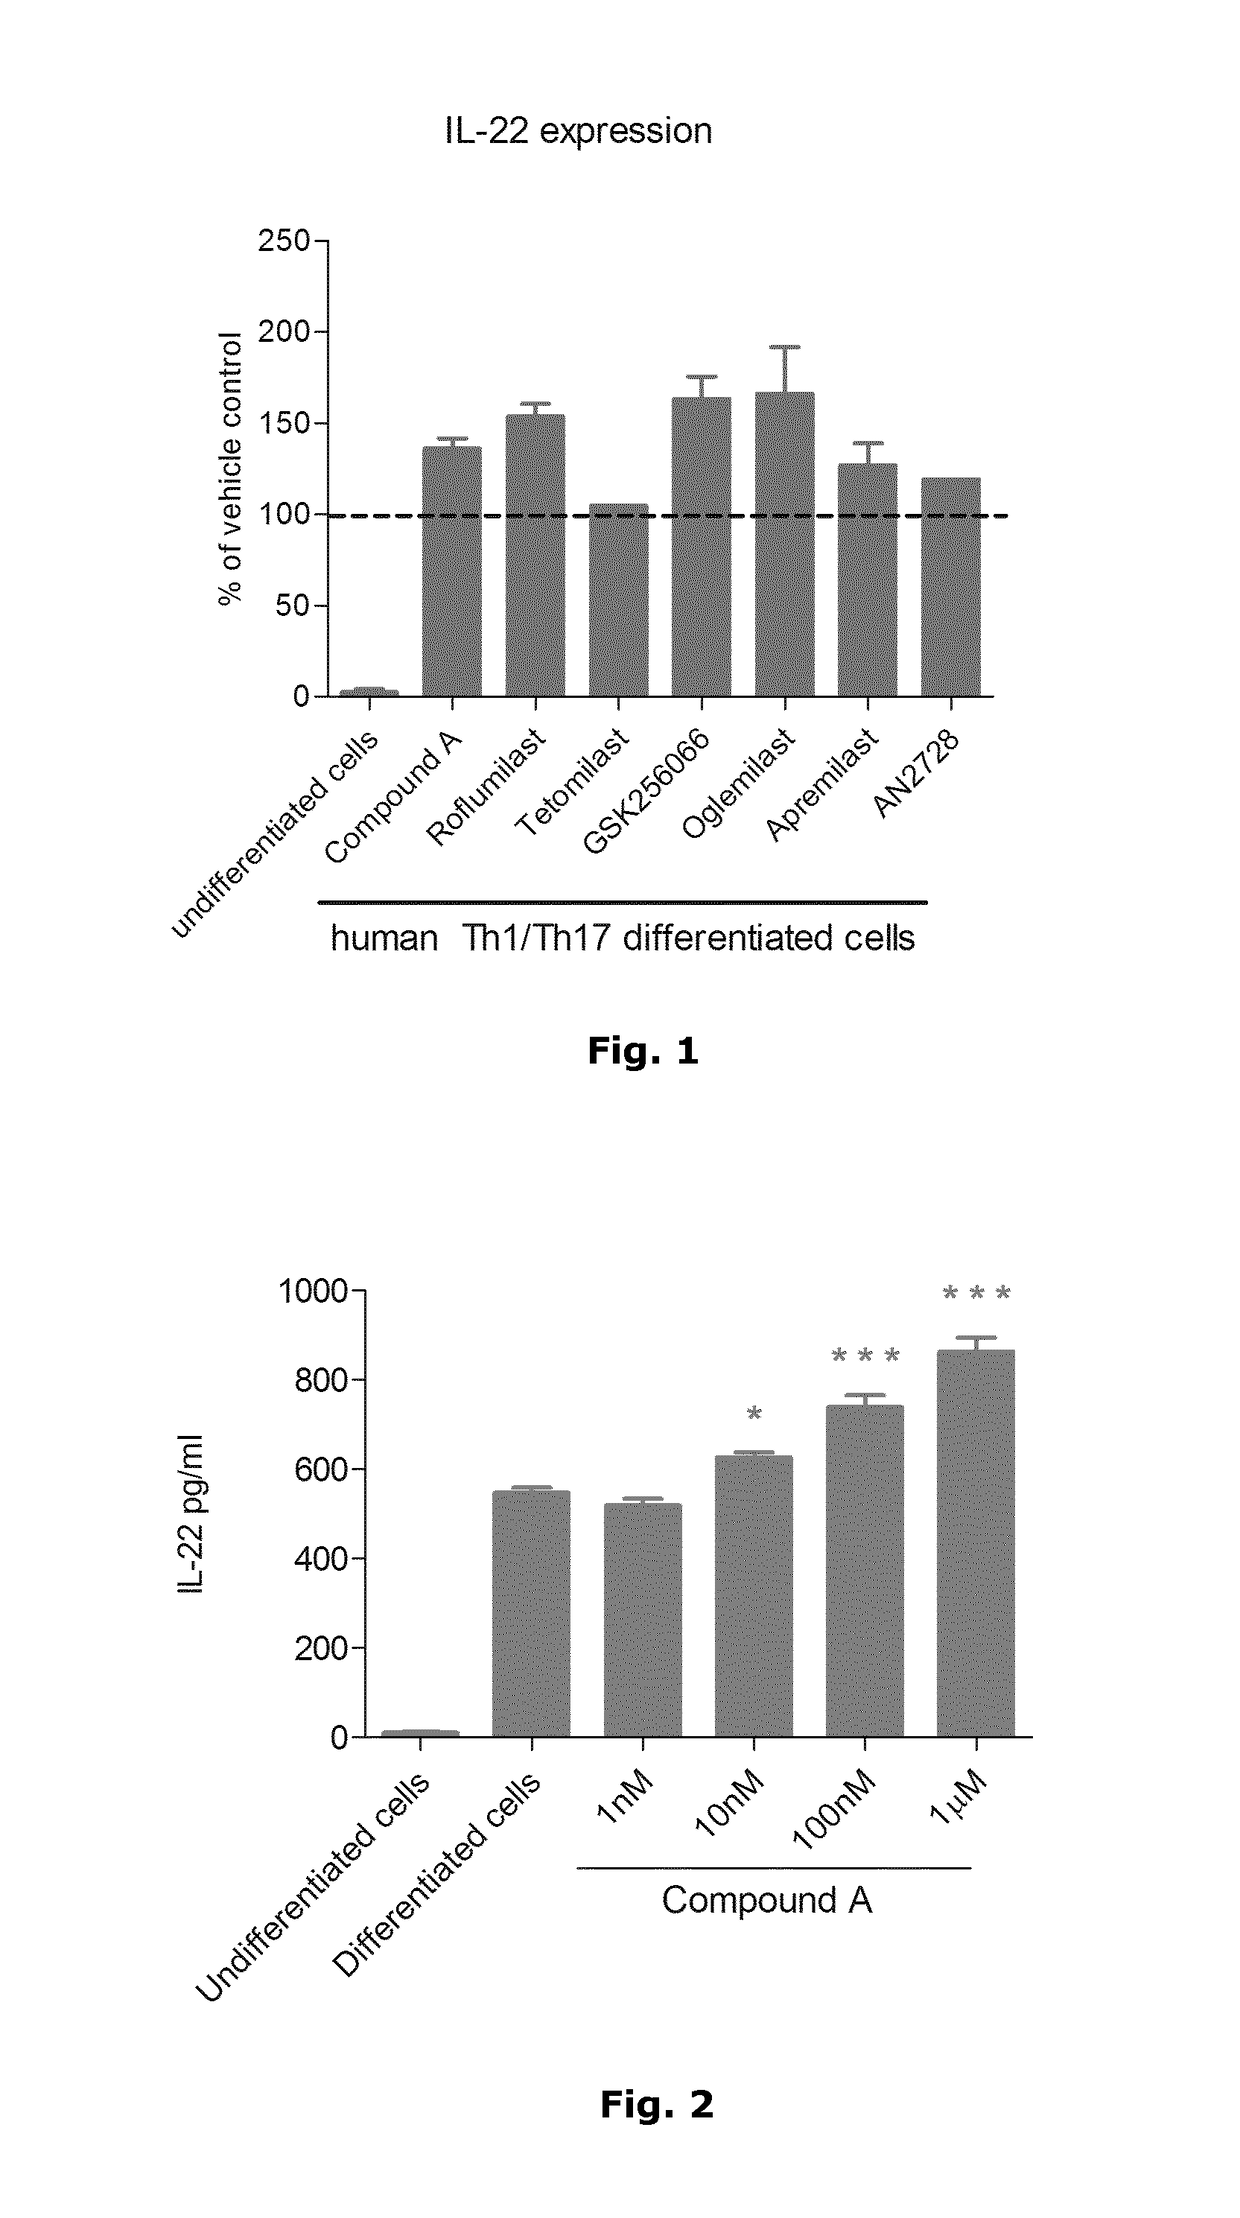 Method of inhibiting the expression of IL-22 in activated T-cells